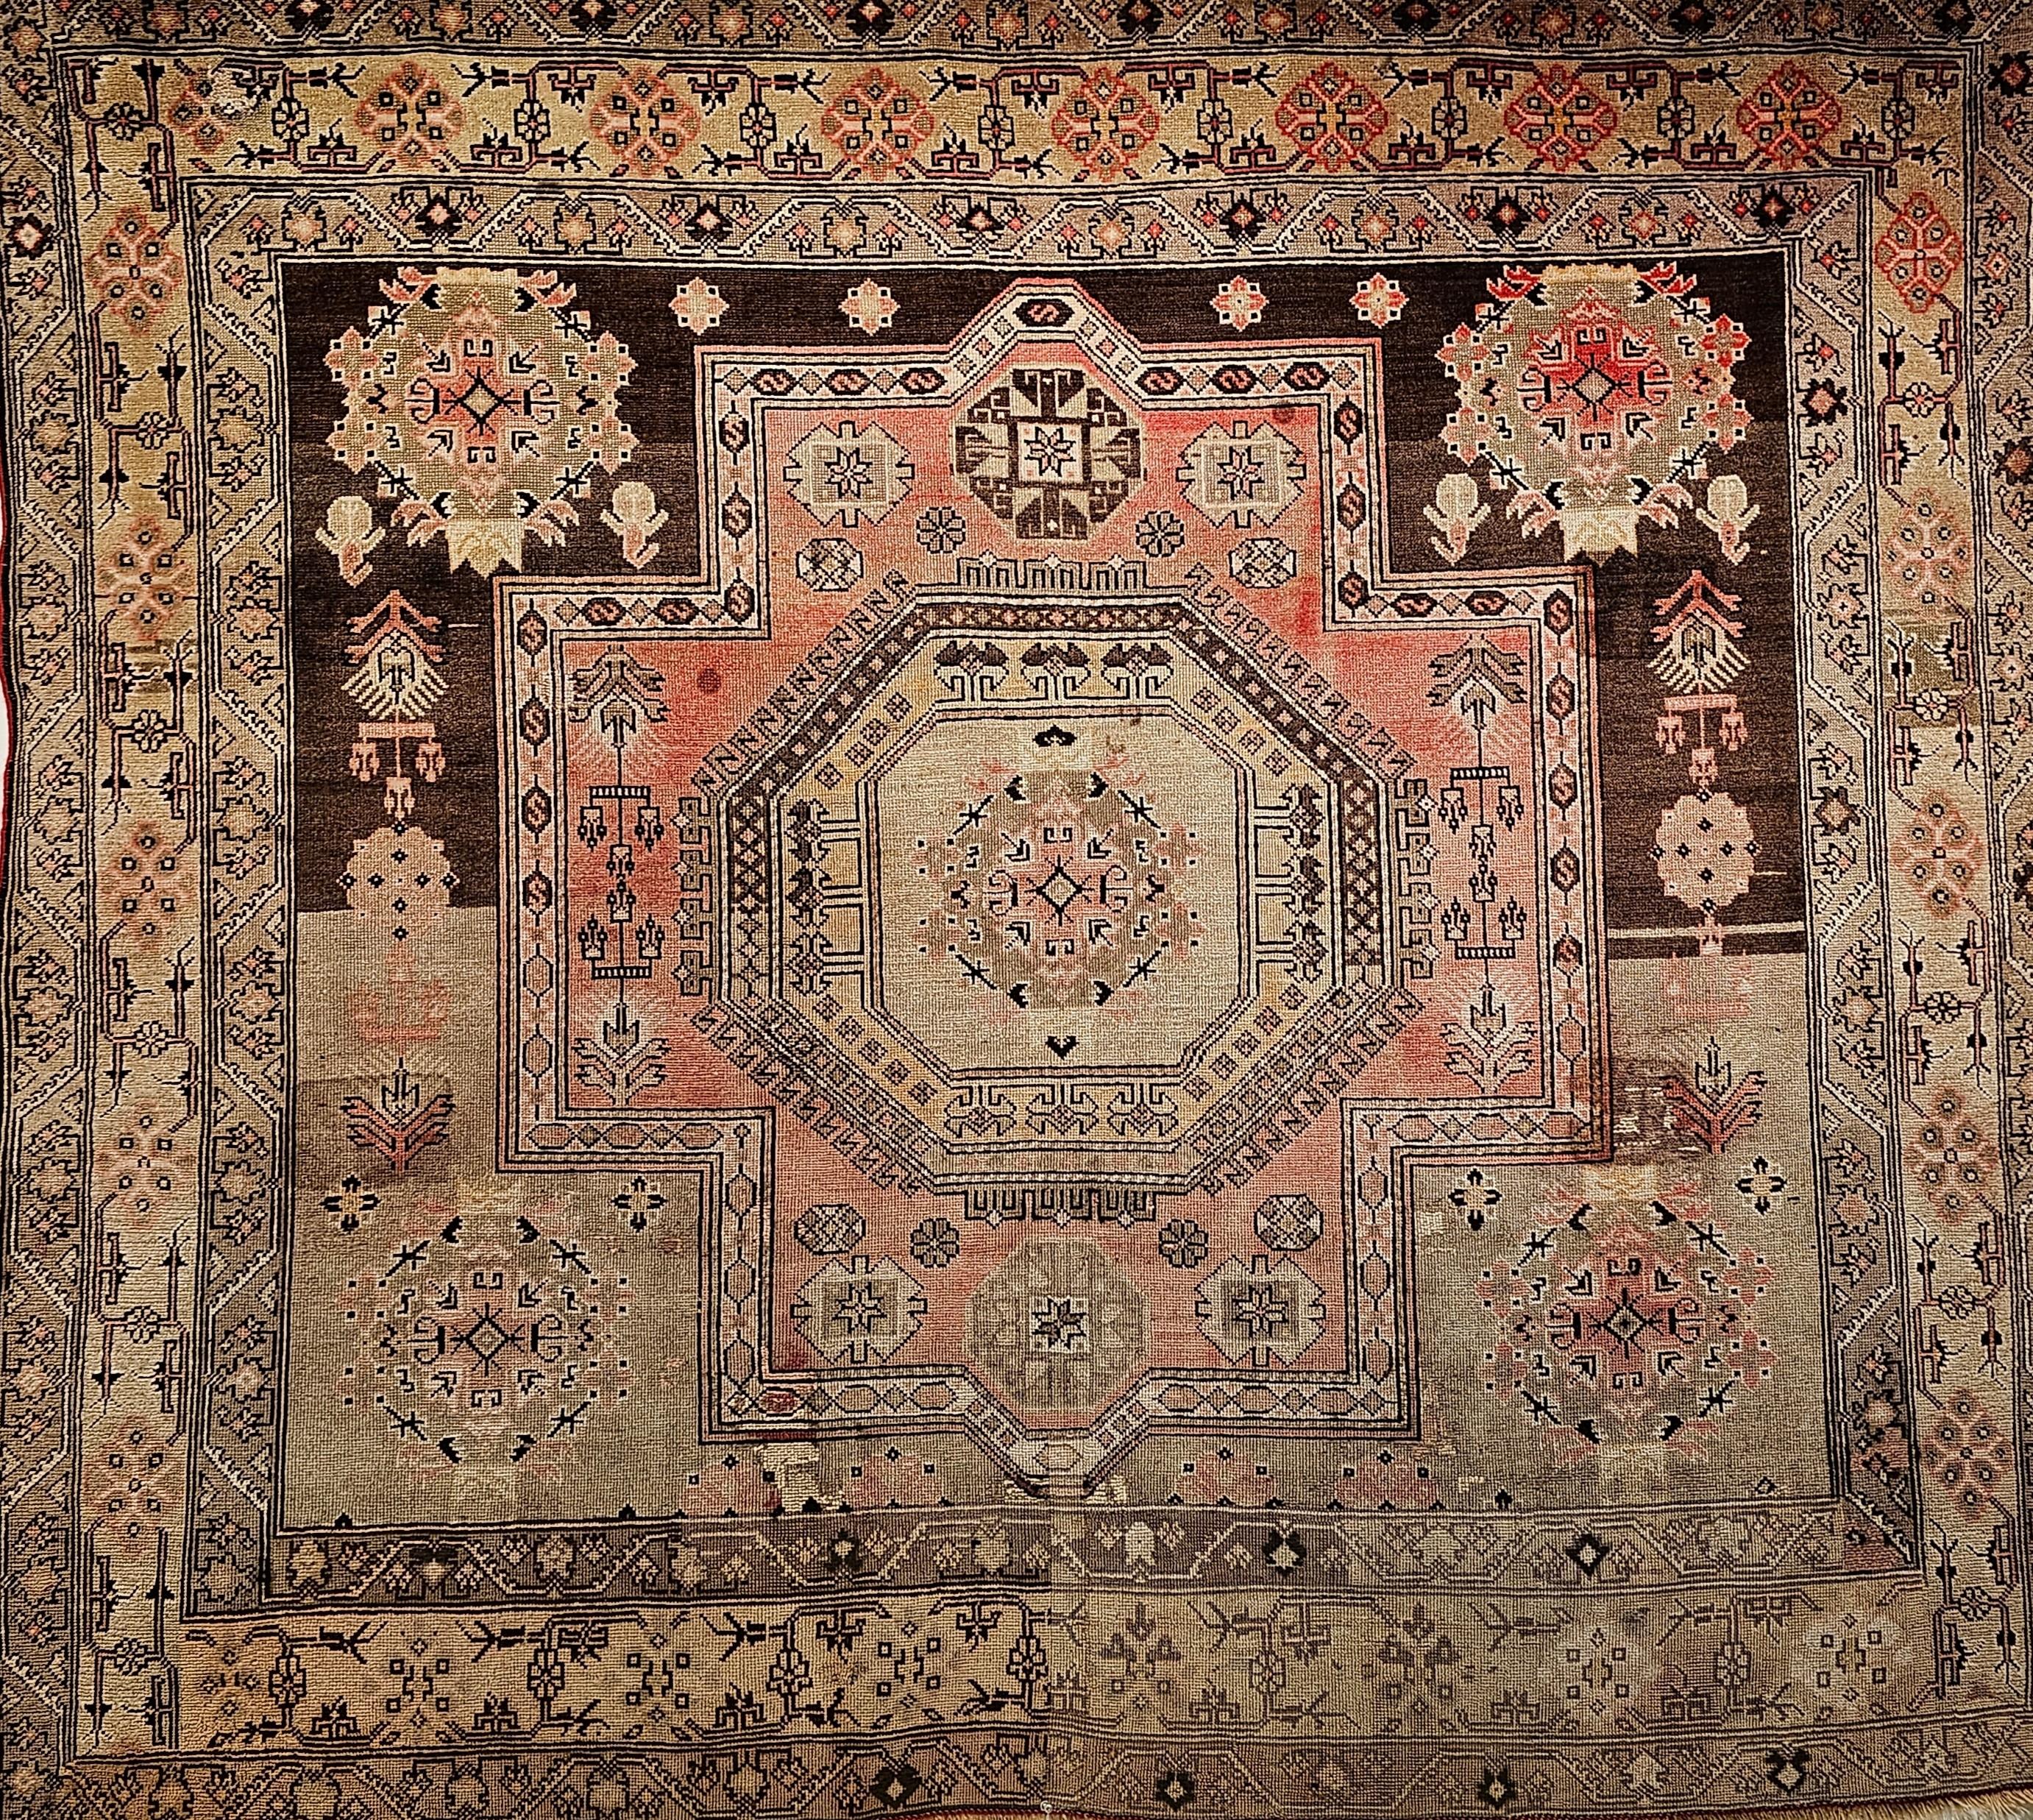 Early 20th century Turkish Oushak in a near square size which is rare and very desirable.  The rug has a medallion geometric design similar to the famous 18th century Mamluk rugs from the Ottoman period in a field of Tan and Chocolate colors.  The